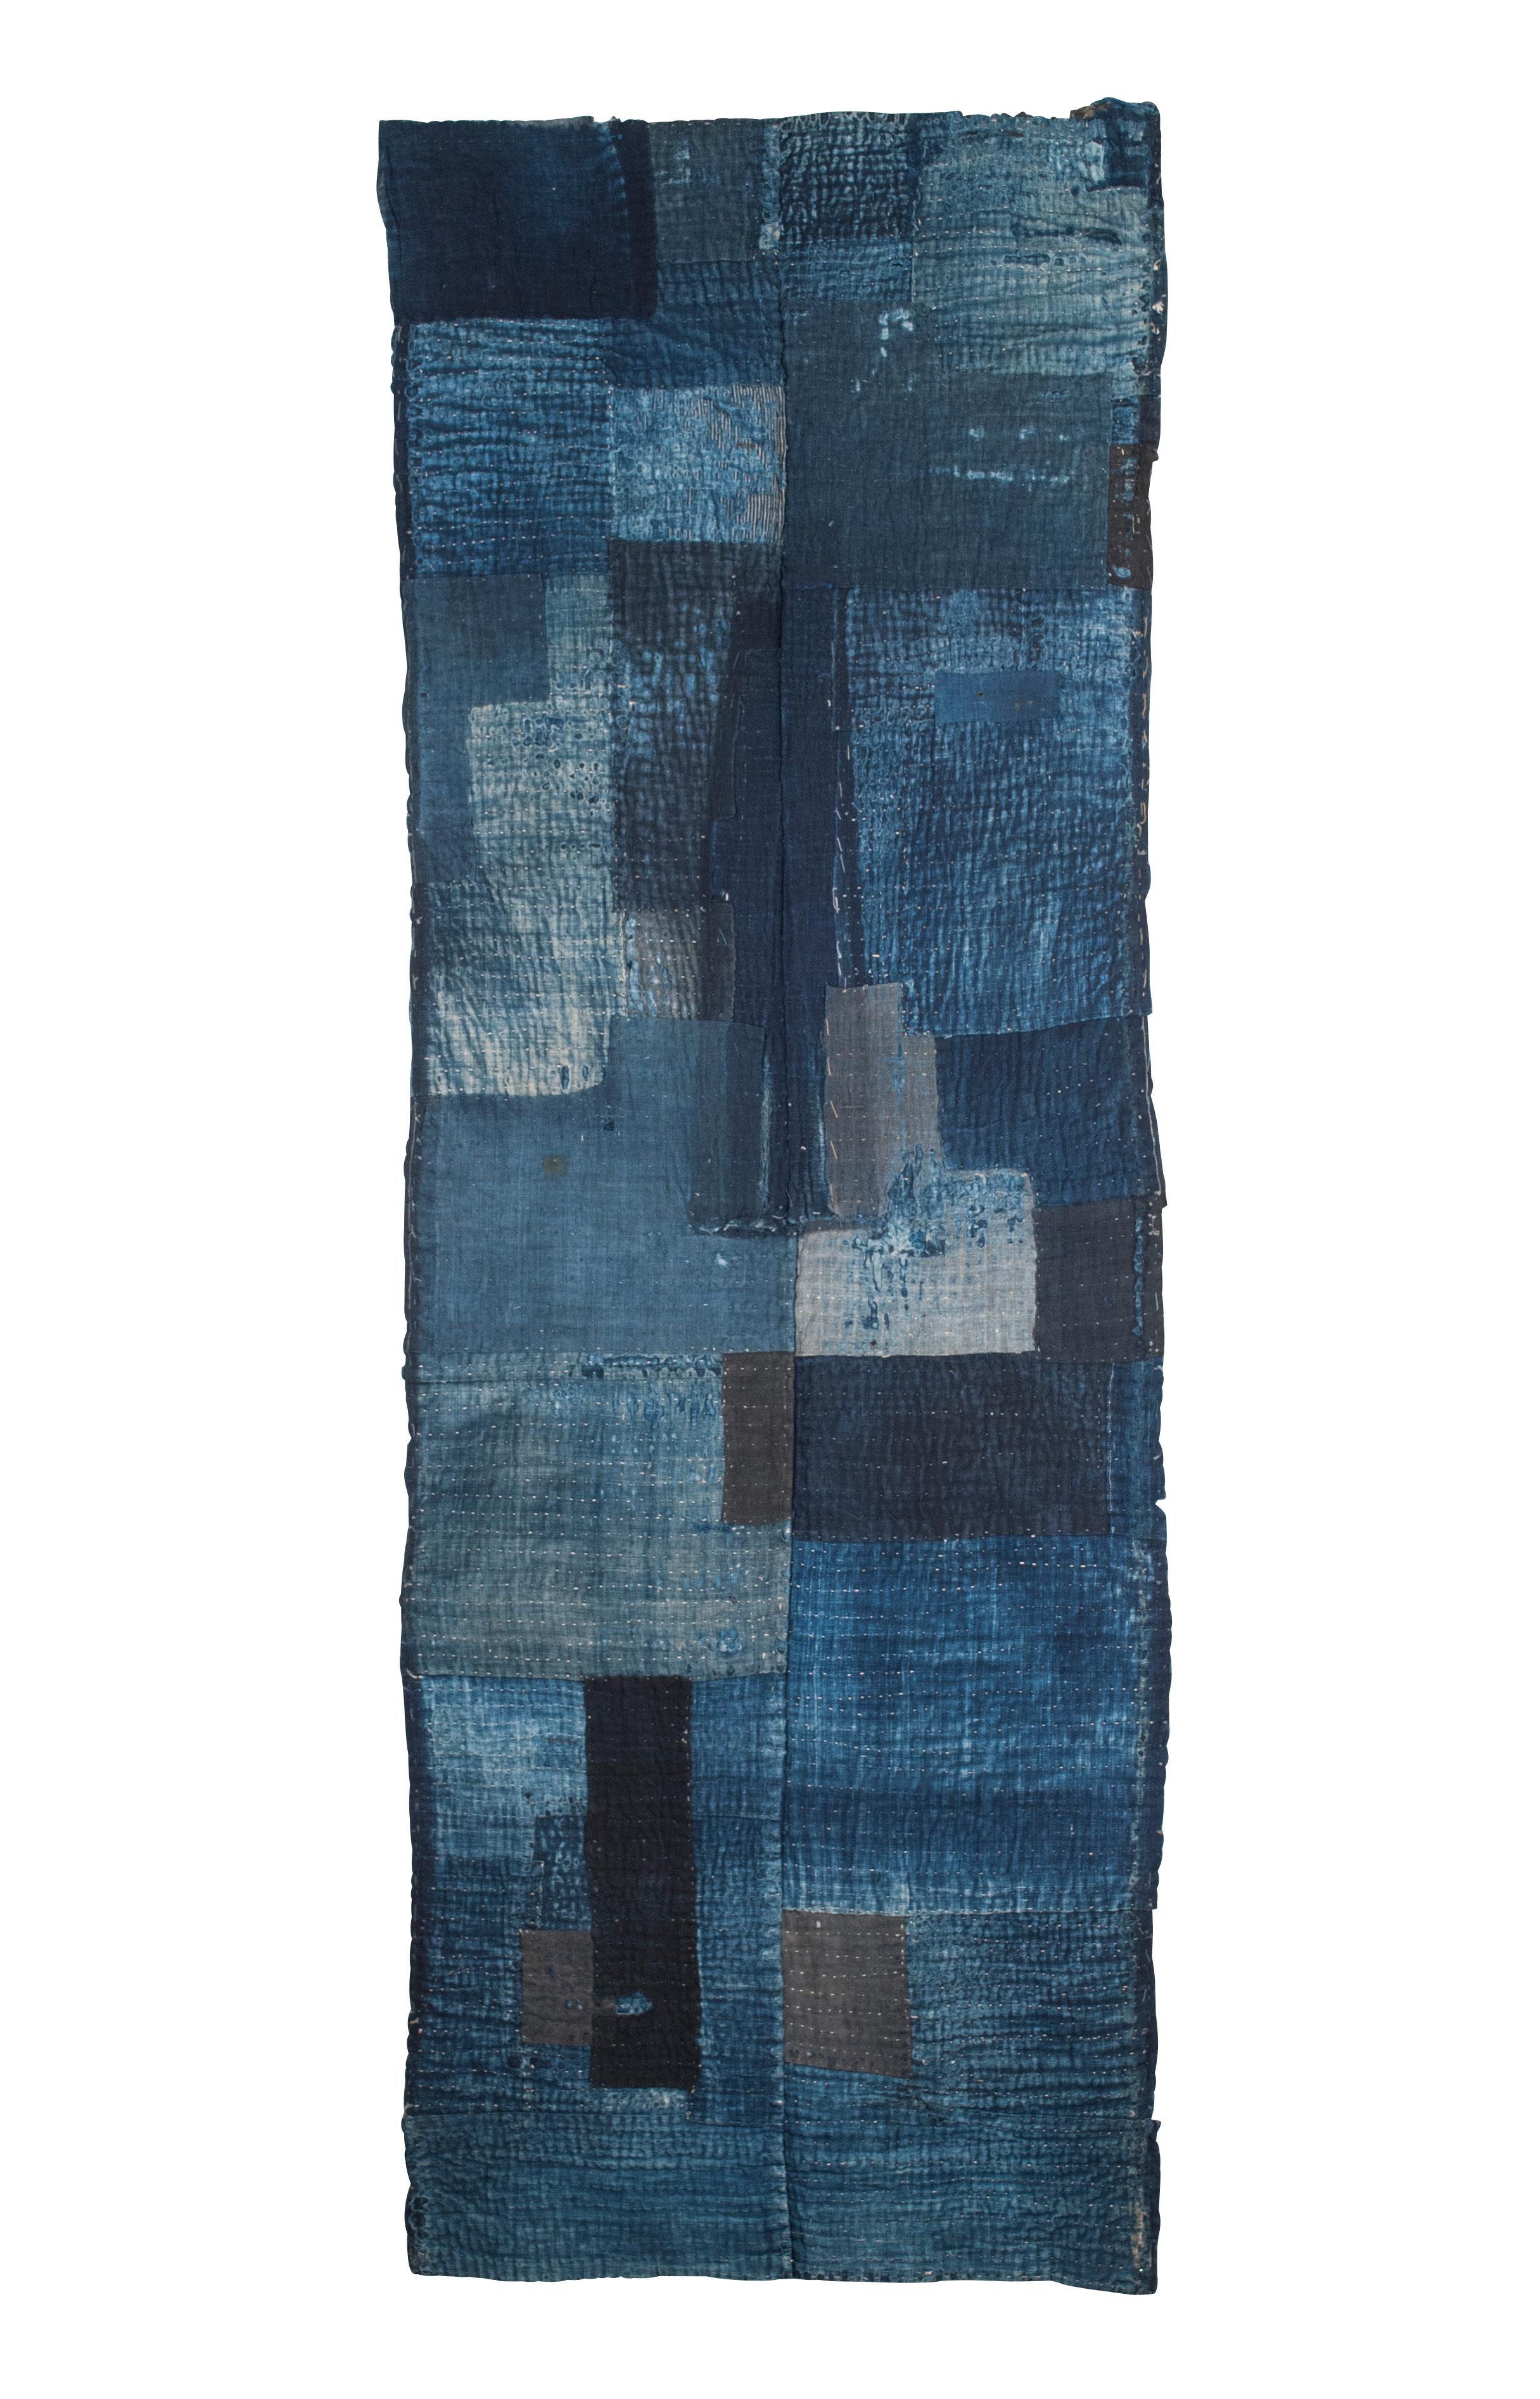 Circa 1900 Japanese 2-Panel Indigo-Dyed Patchwork Boro

This two-panel recycled patchwork cloth is made entirely of indigo dyed cotton and is likely part of a larger futon cover. A wonderful example of the resourcefulness of rural Japanese life in